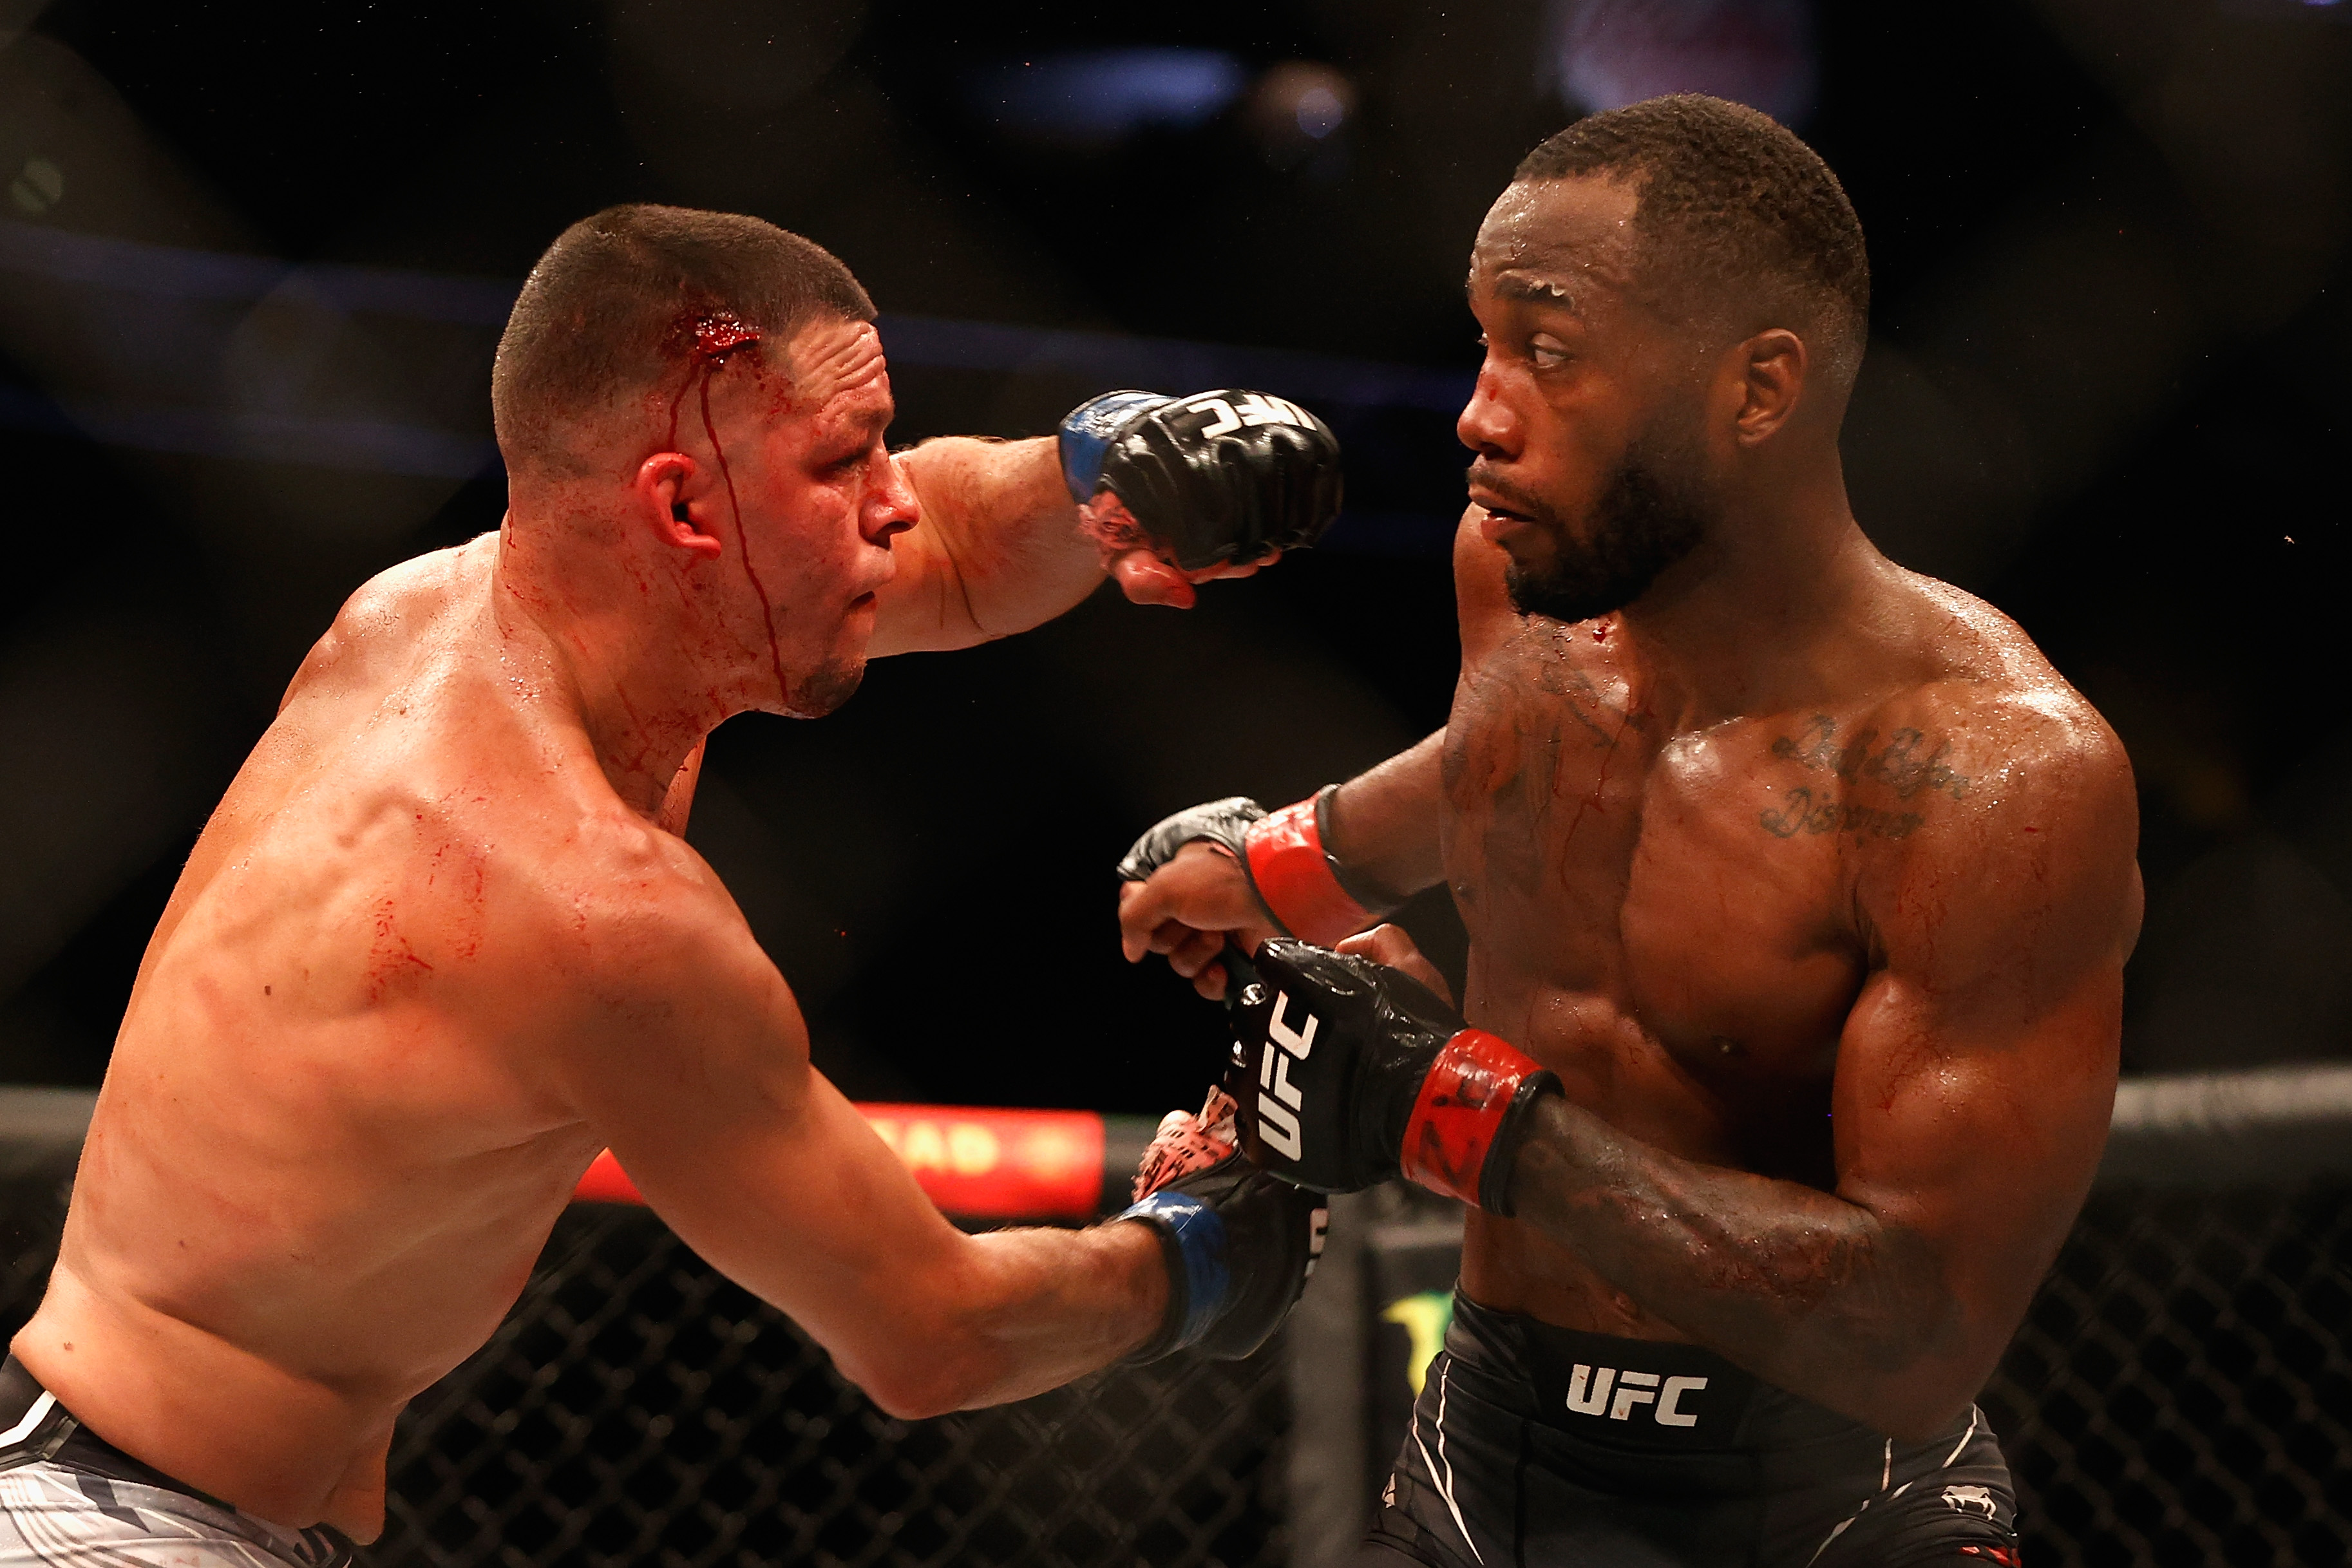 Leon Edwards had to survive a late rally from Nate Diaz&nbsp;to win a decision